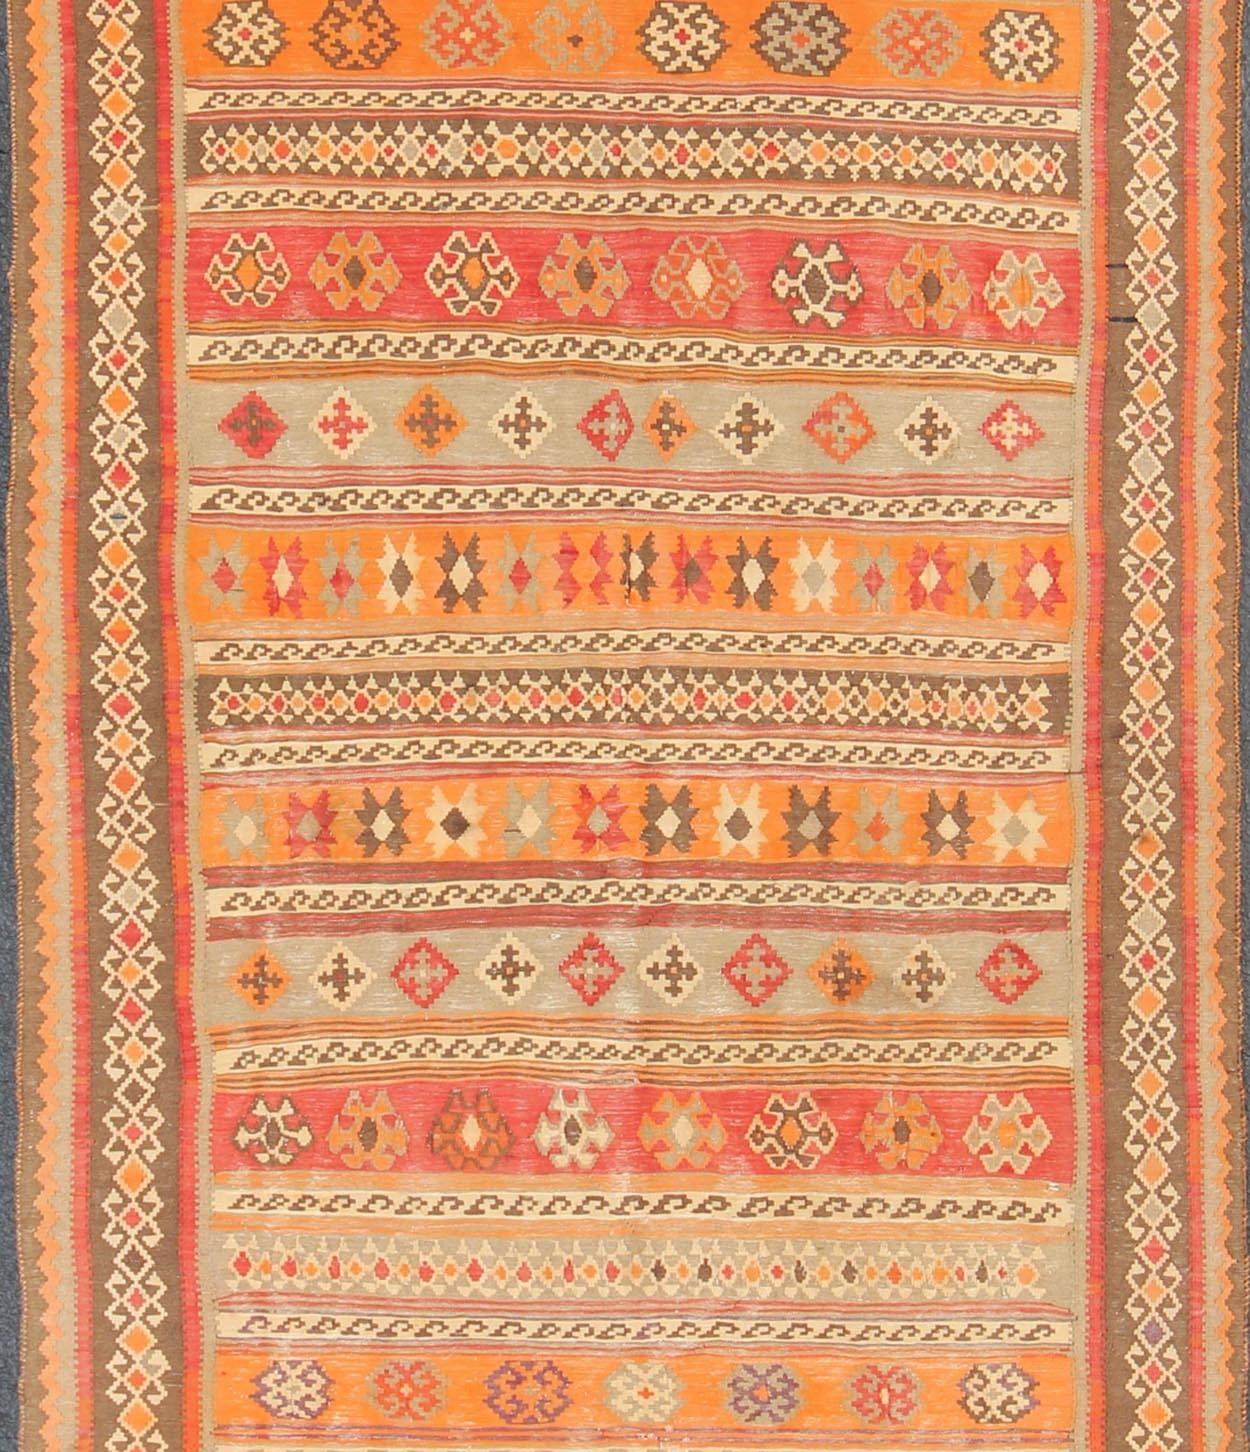 Hand-Woven Antique Moroccan Kilim with Embroidery in Red, Orange, Gray and Brown For Sale